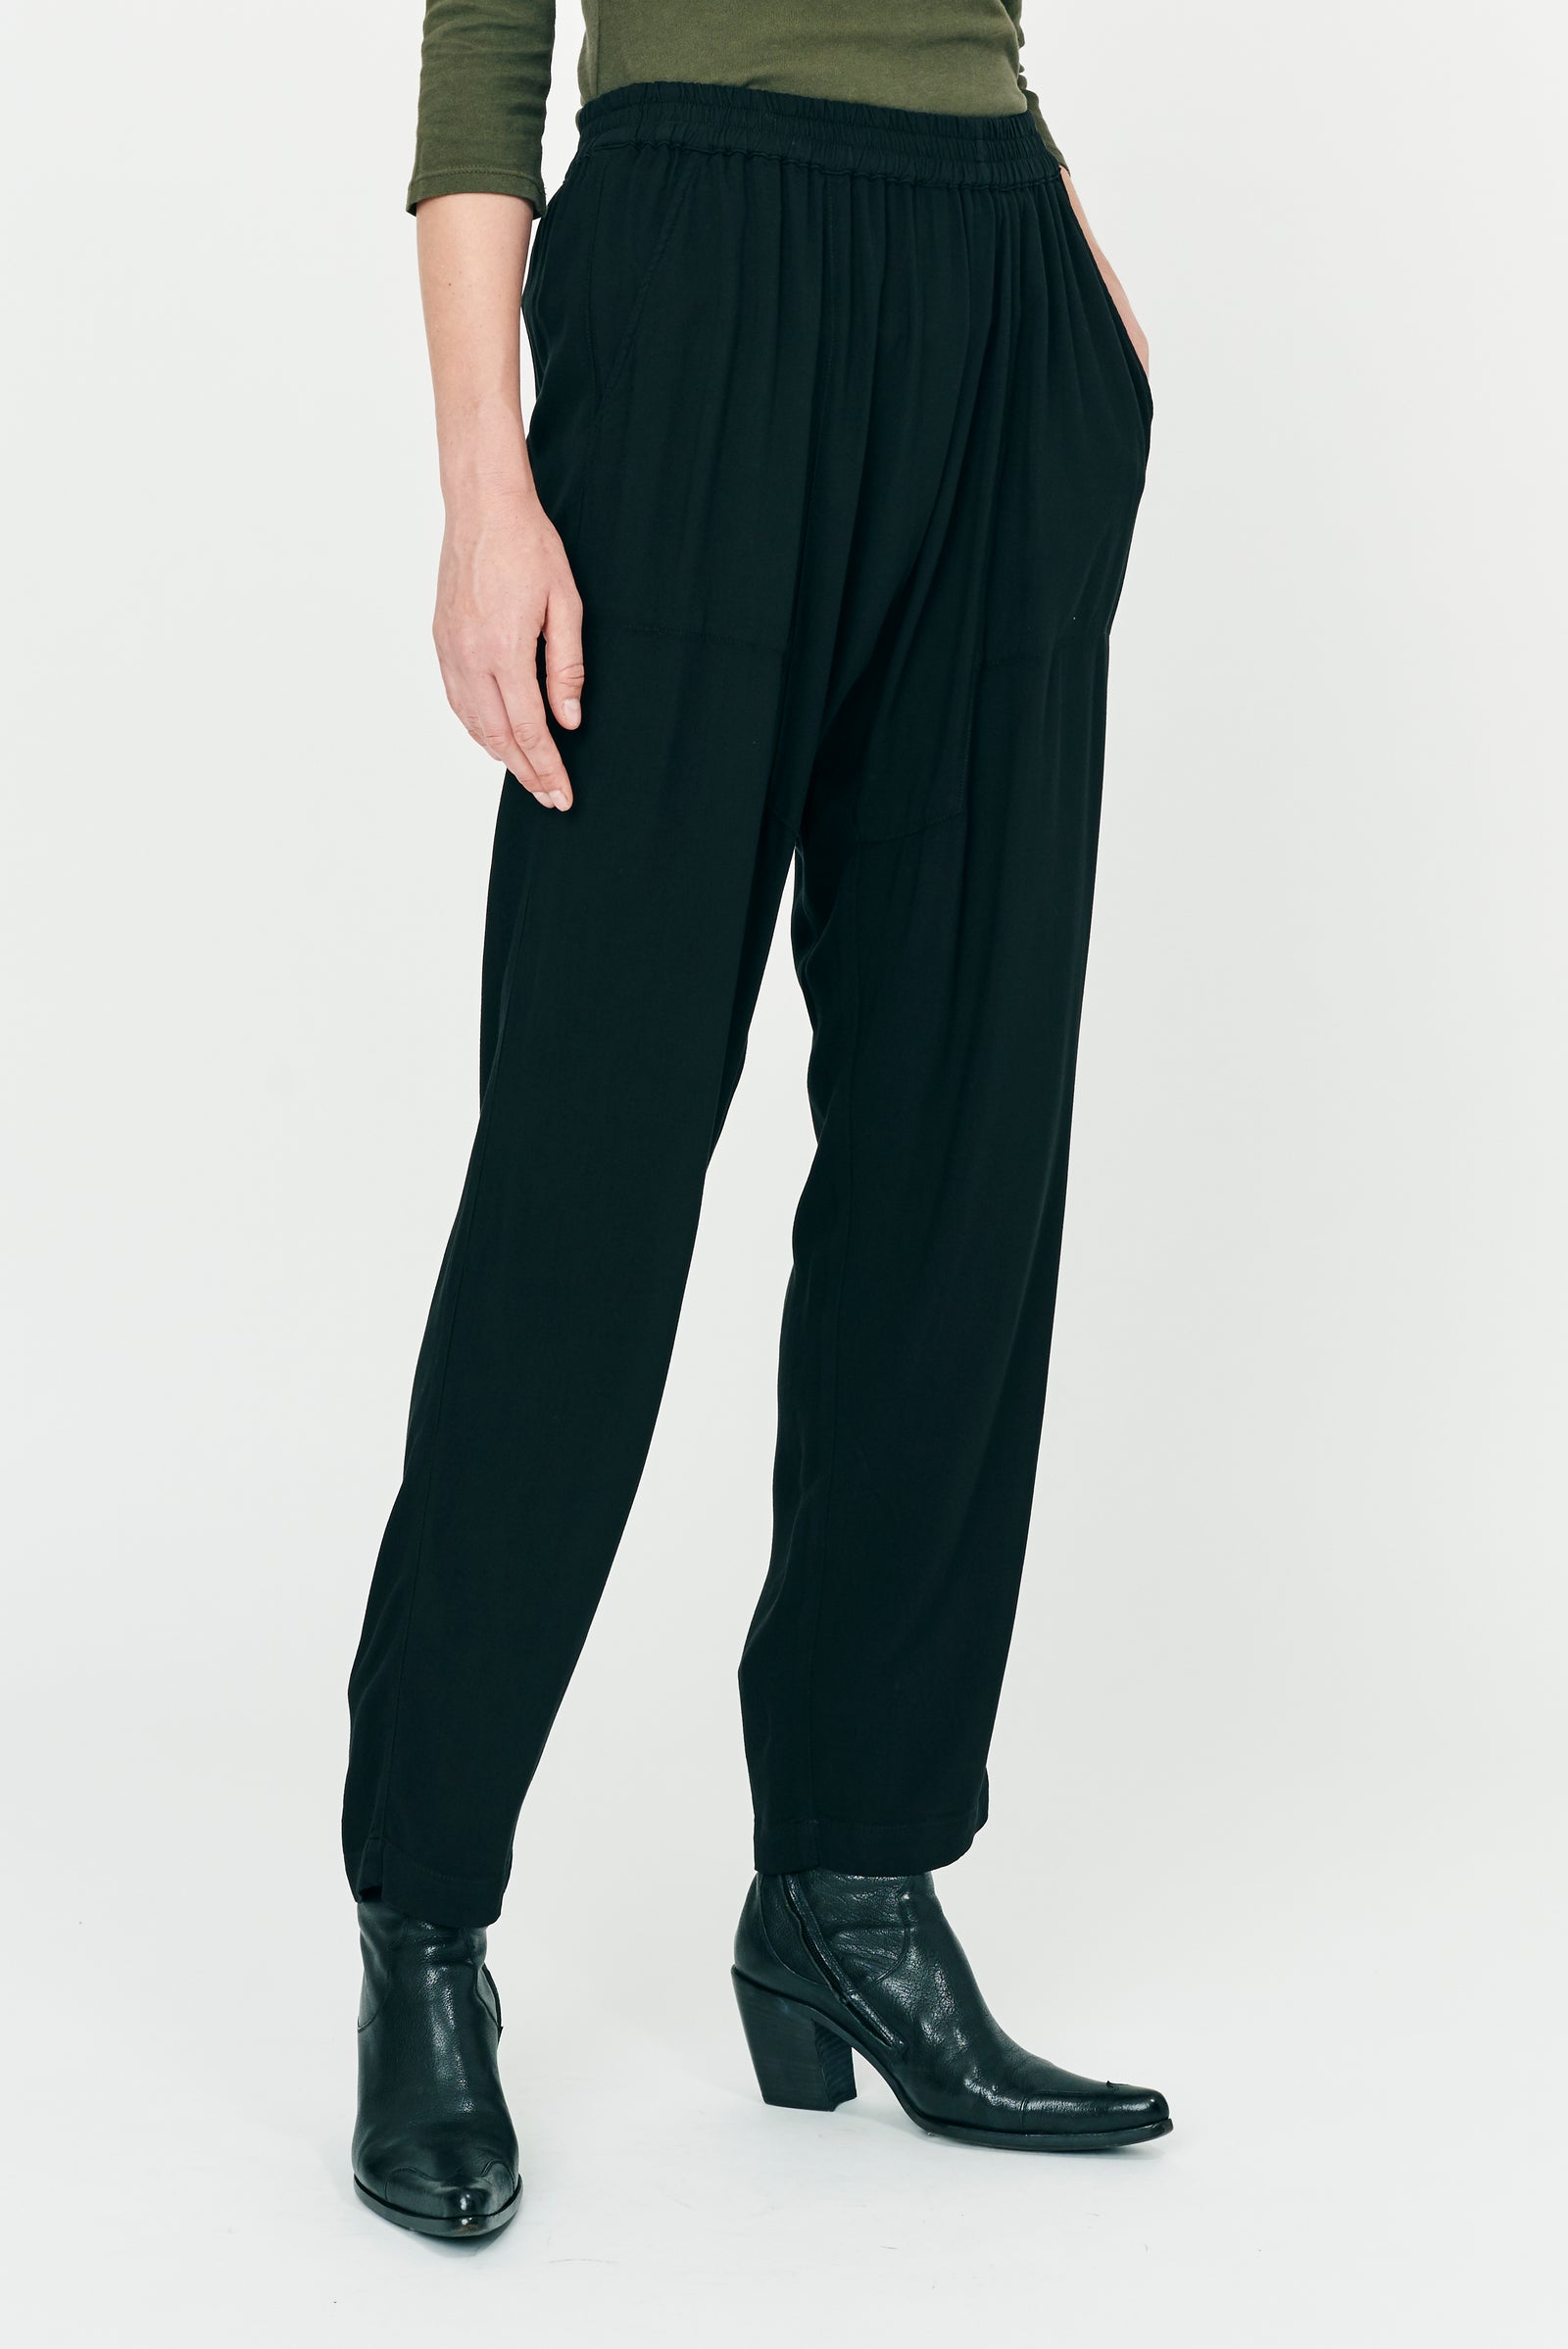 Black Ghost Ranch Soft Twill Sunday Pant RA-PANT ARCHIVE-FALL2'22   